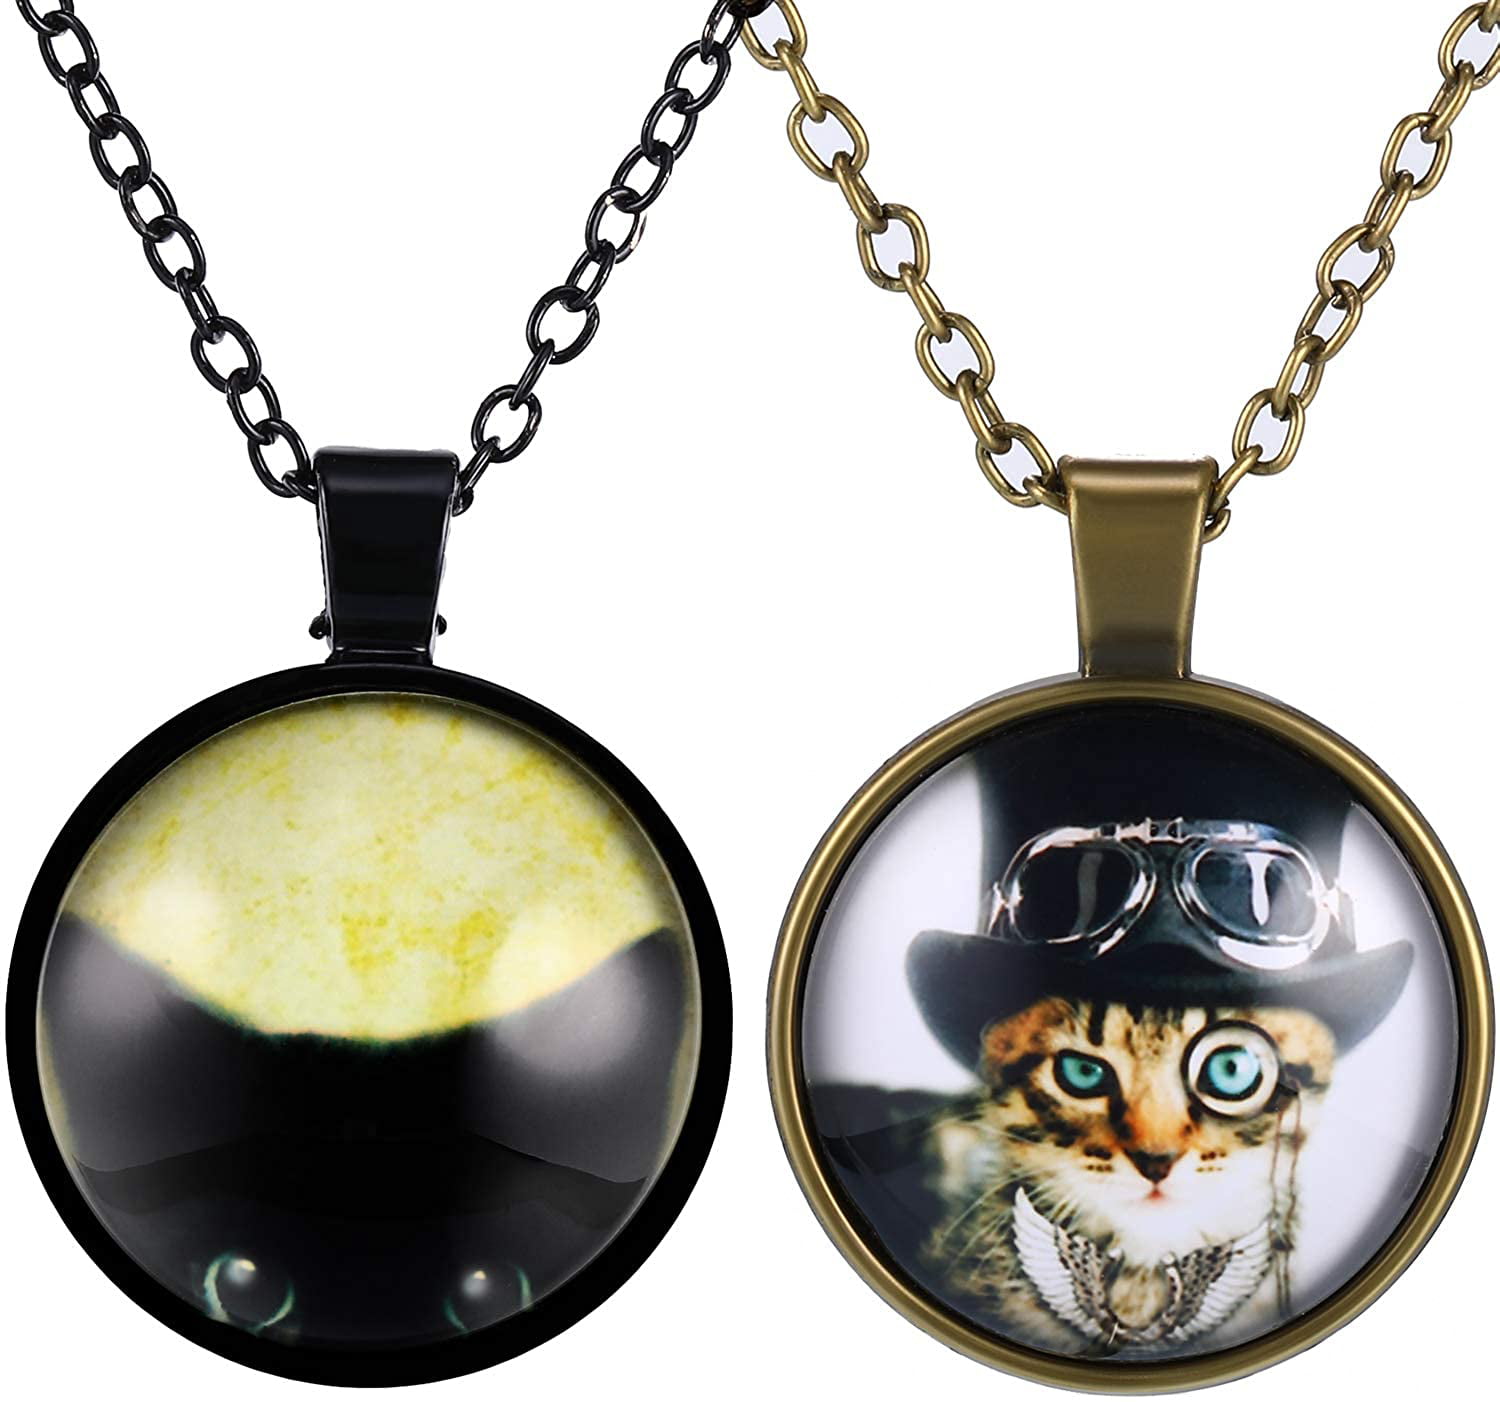 cat themed gifts Kawaii cat Steampunk cat Cat charm Cat lover gift Black cat pendant Cat jewelry Black cat necklace cat gifts